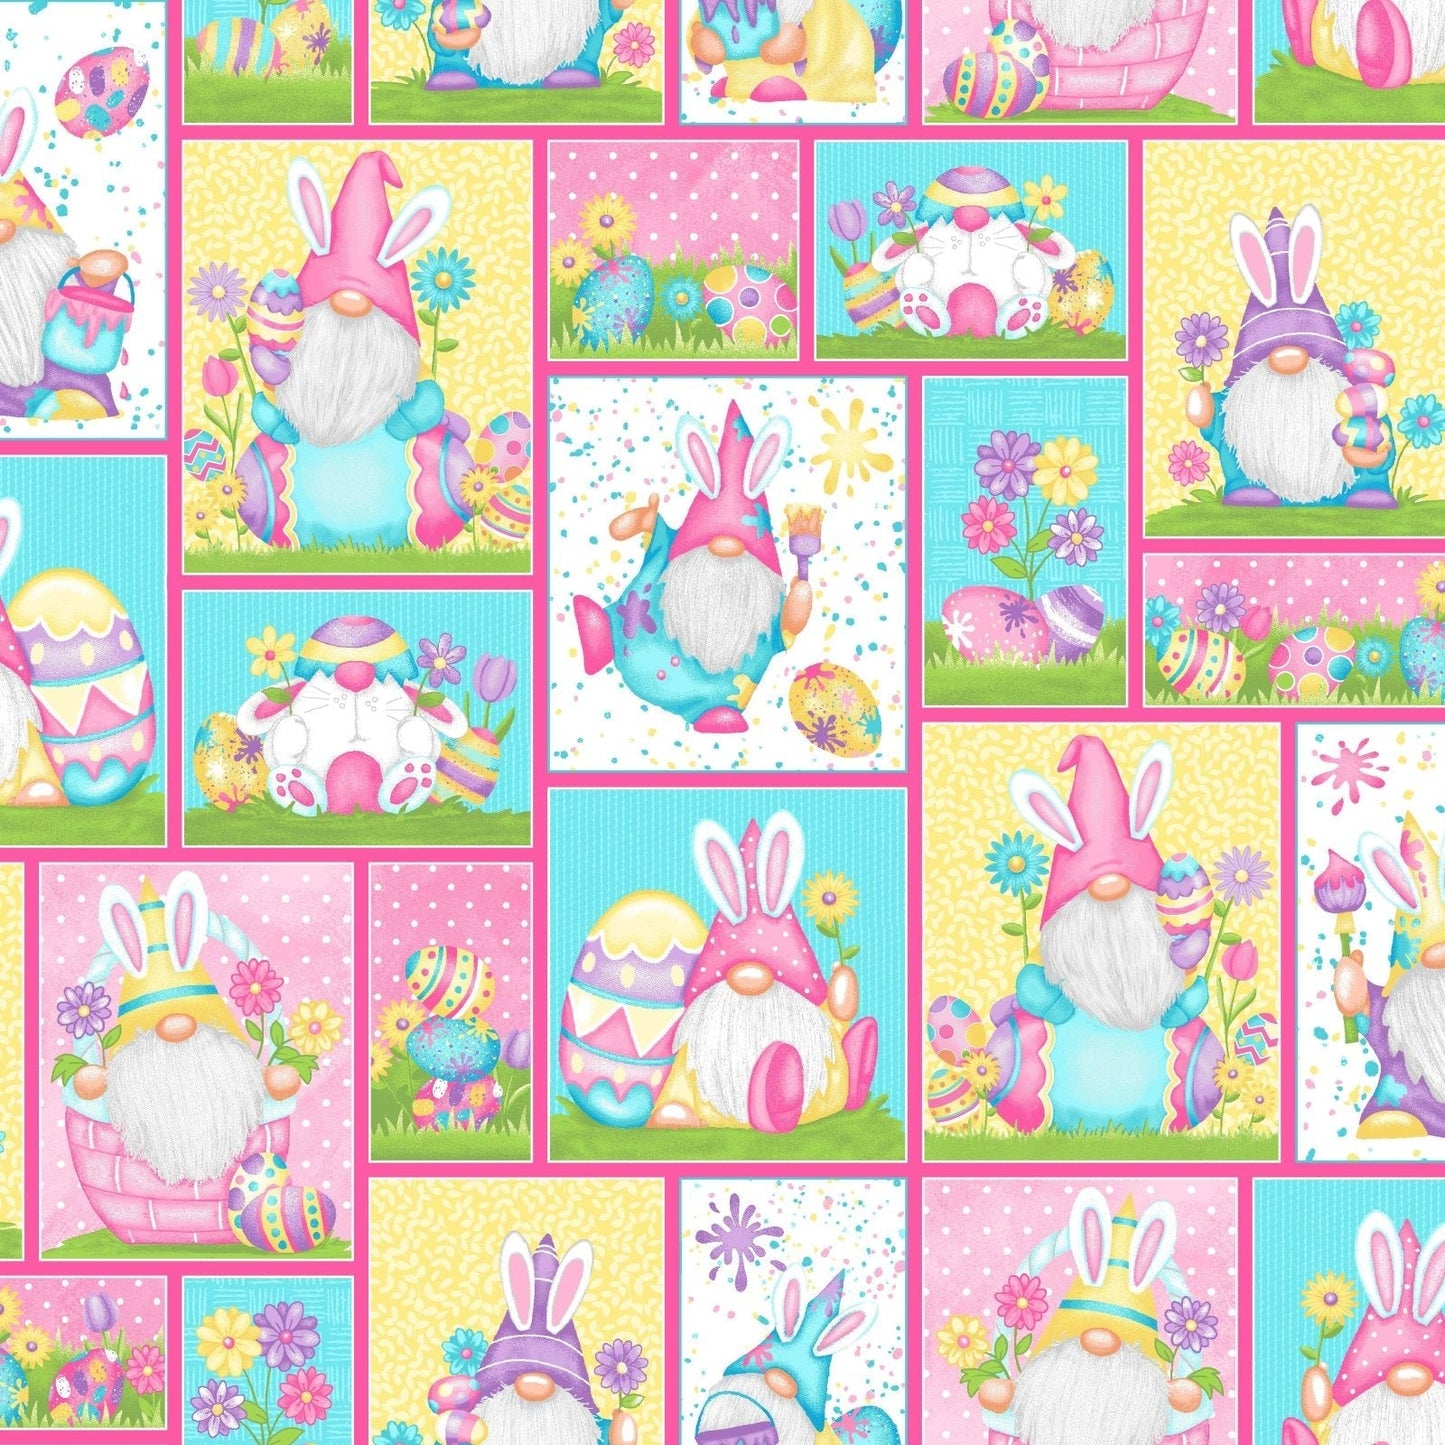 Hoppy Easter Gnome fabric 562-21 Patchwork Easter fabric